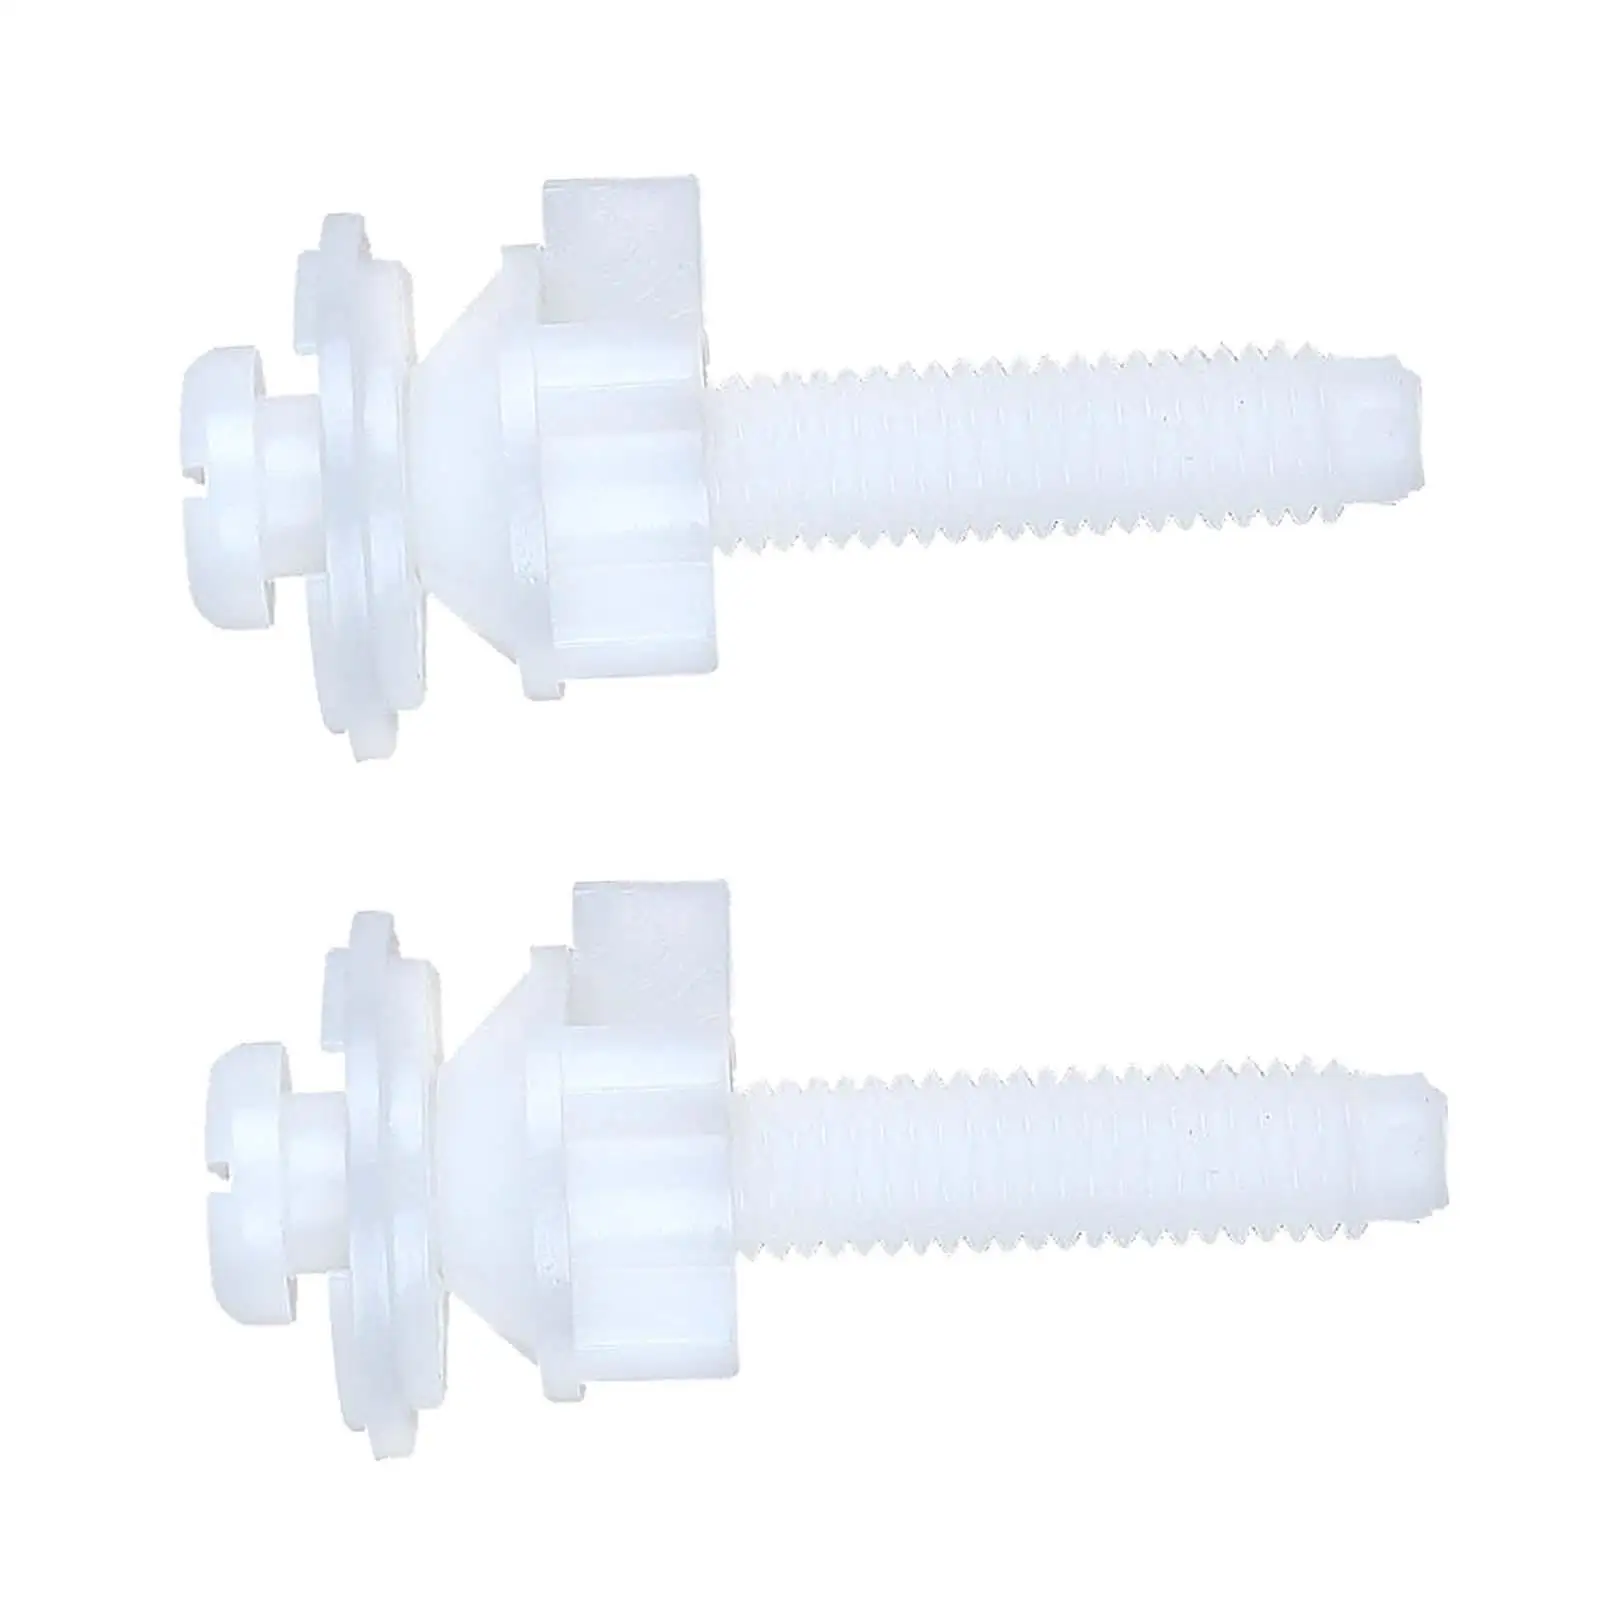 2 Pieces Toilet Seat Screws Replacement Fastener Accessories for Toilet Seat